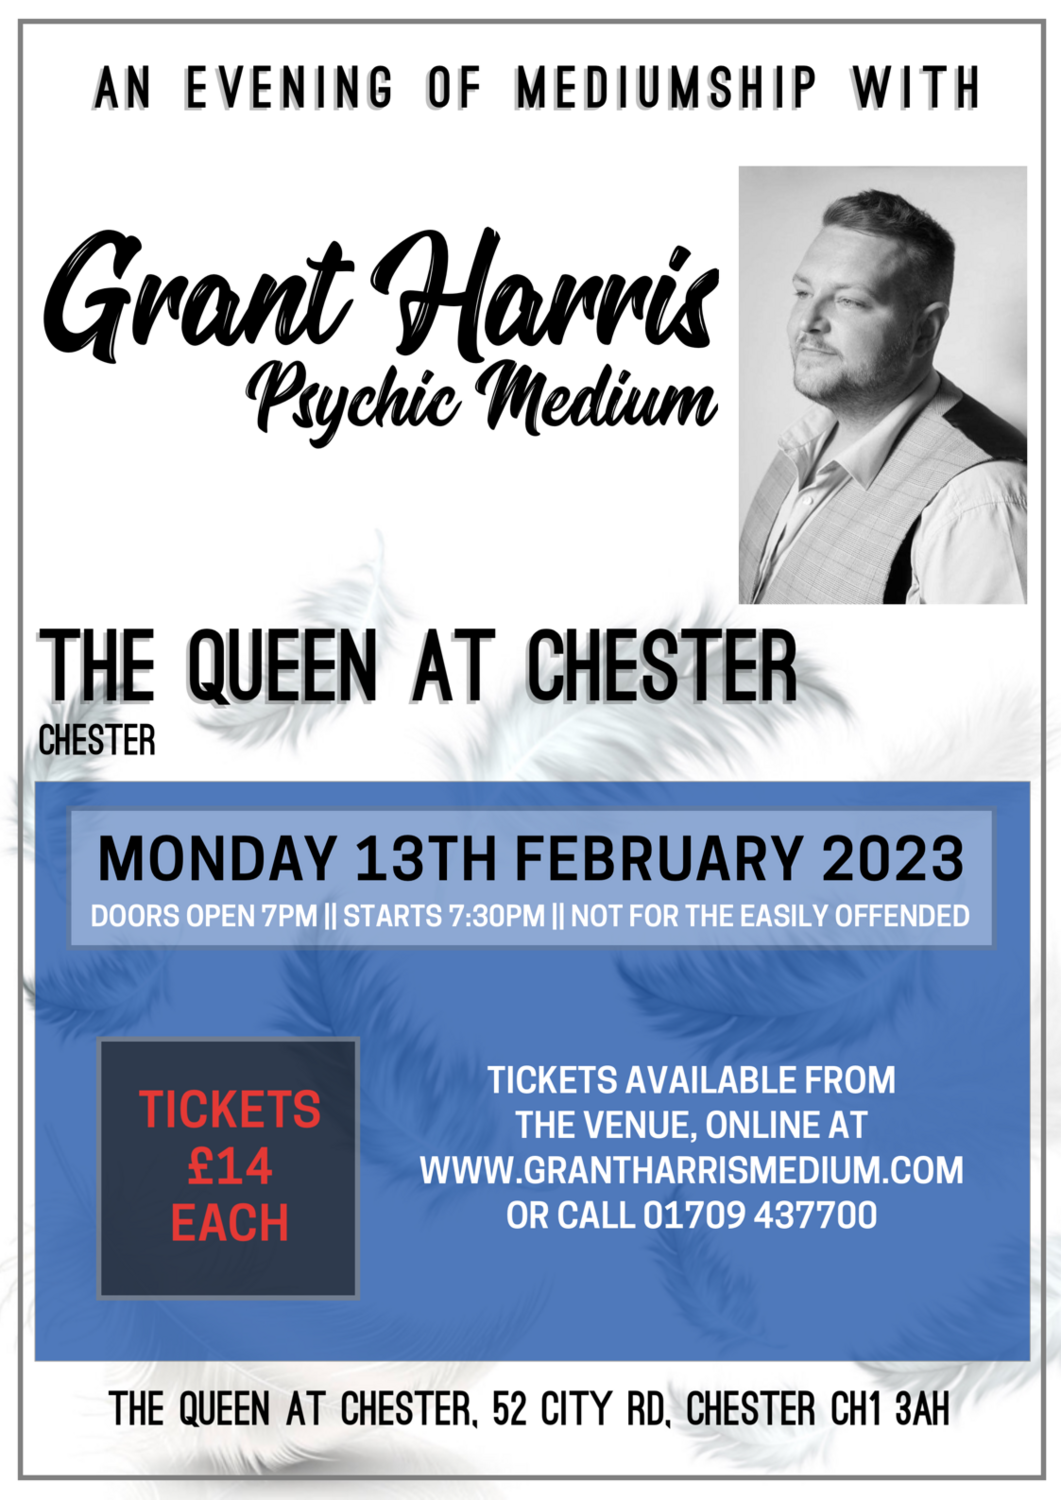 The Queen Hotel at Chester, Monday 13th February 2023